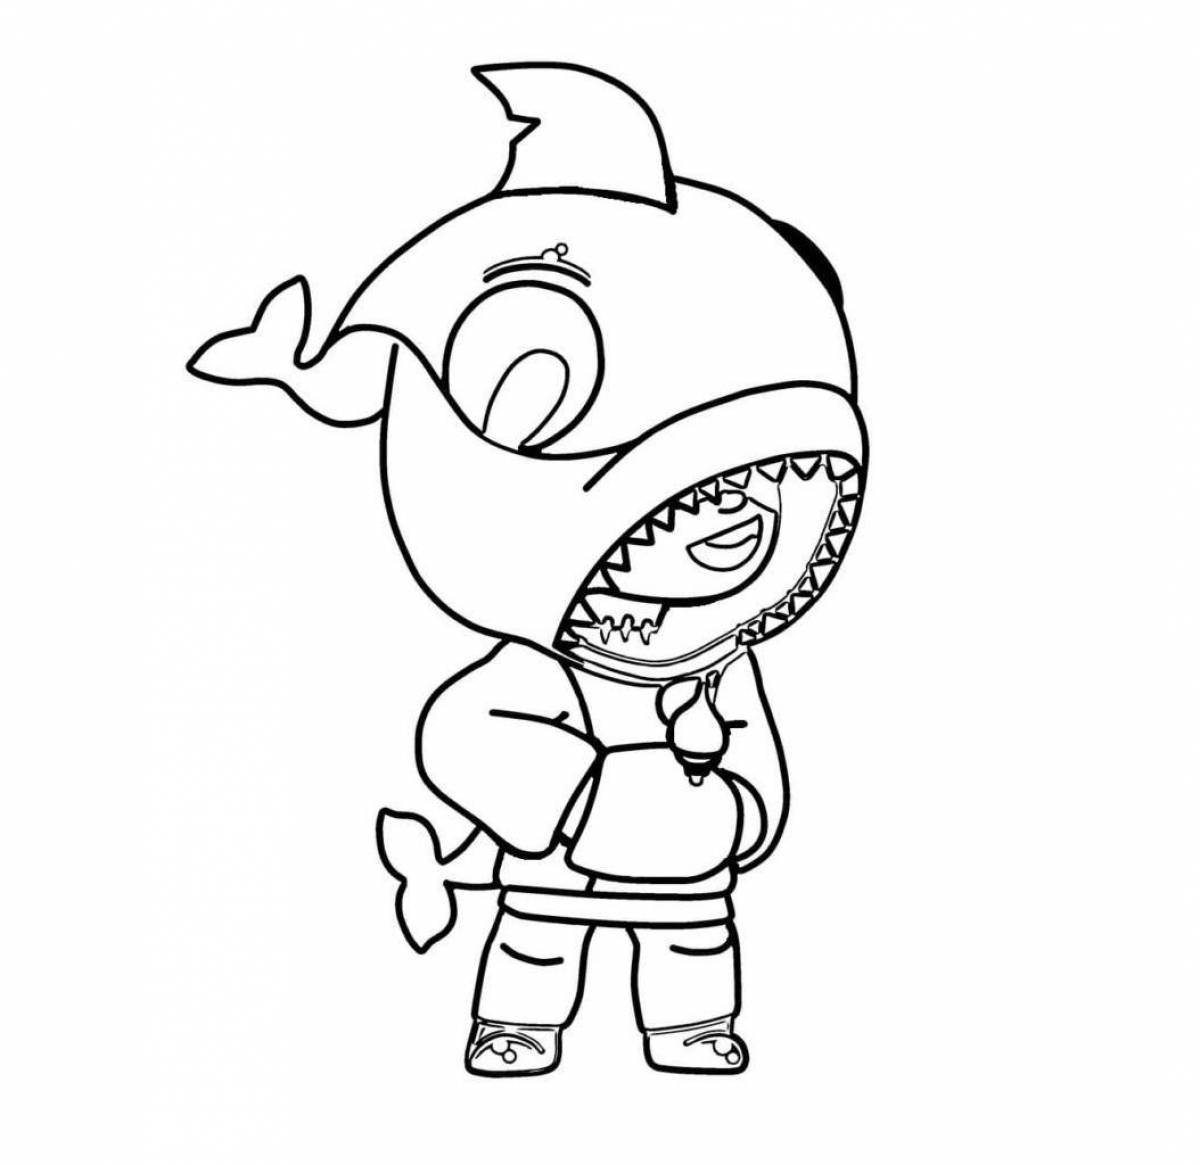 Radiant leon shark coloring page